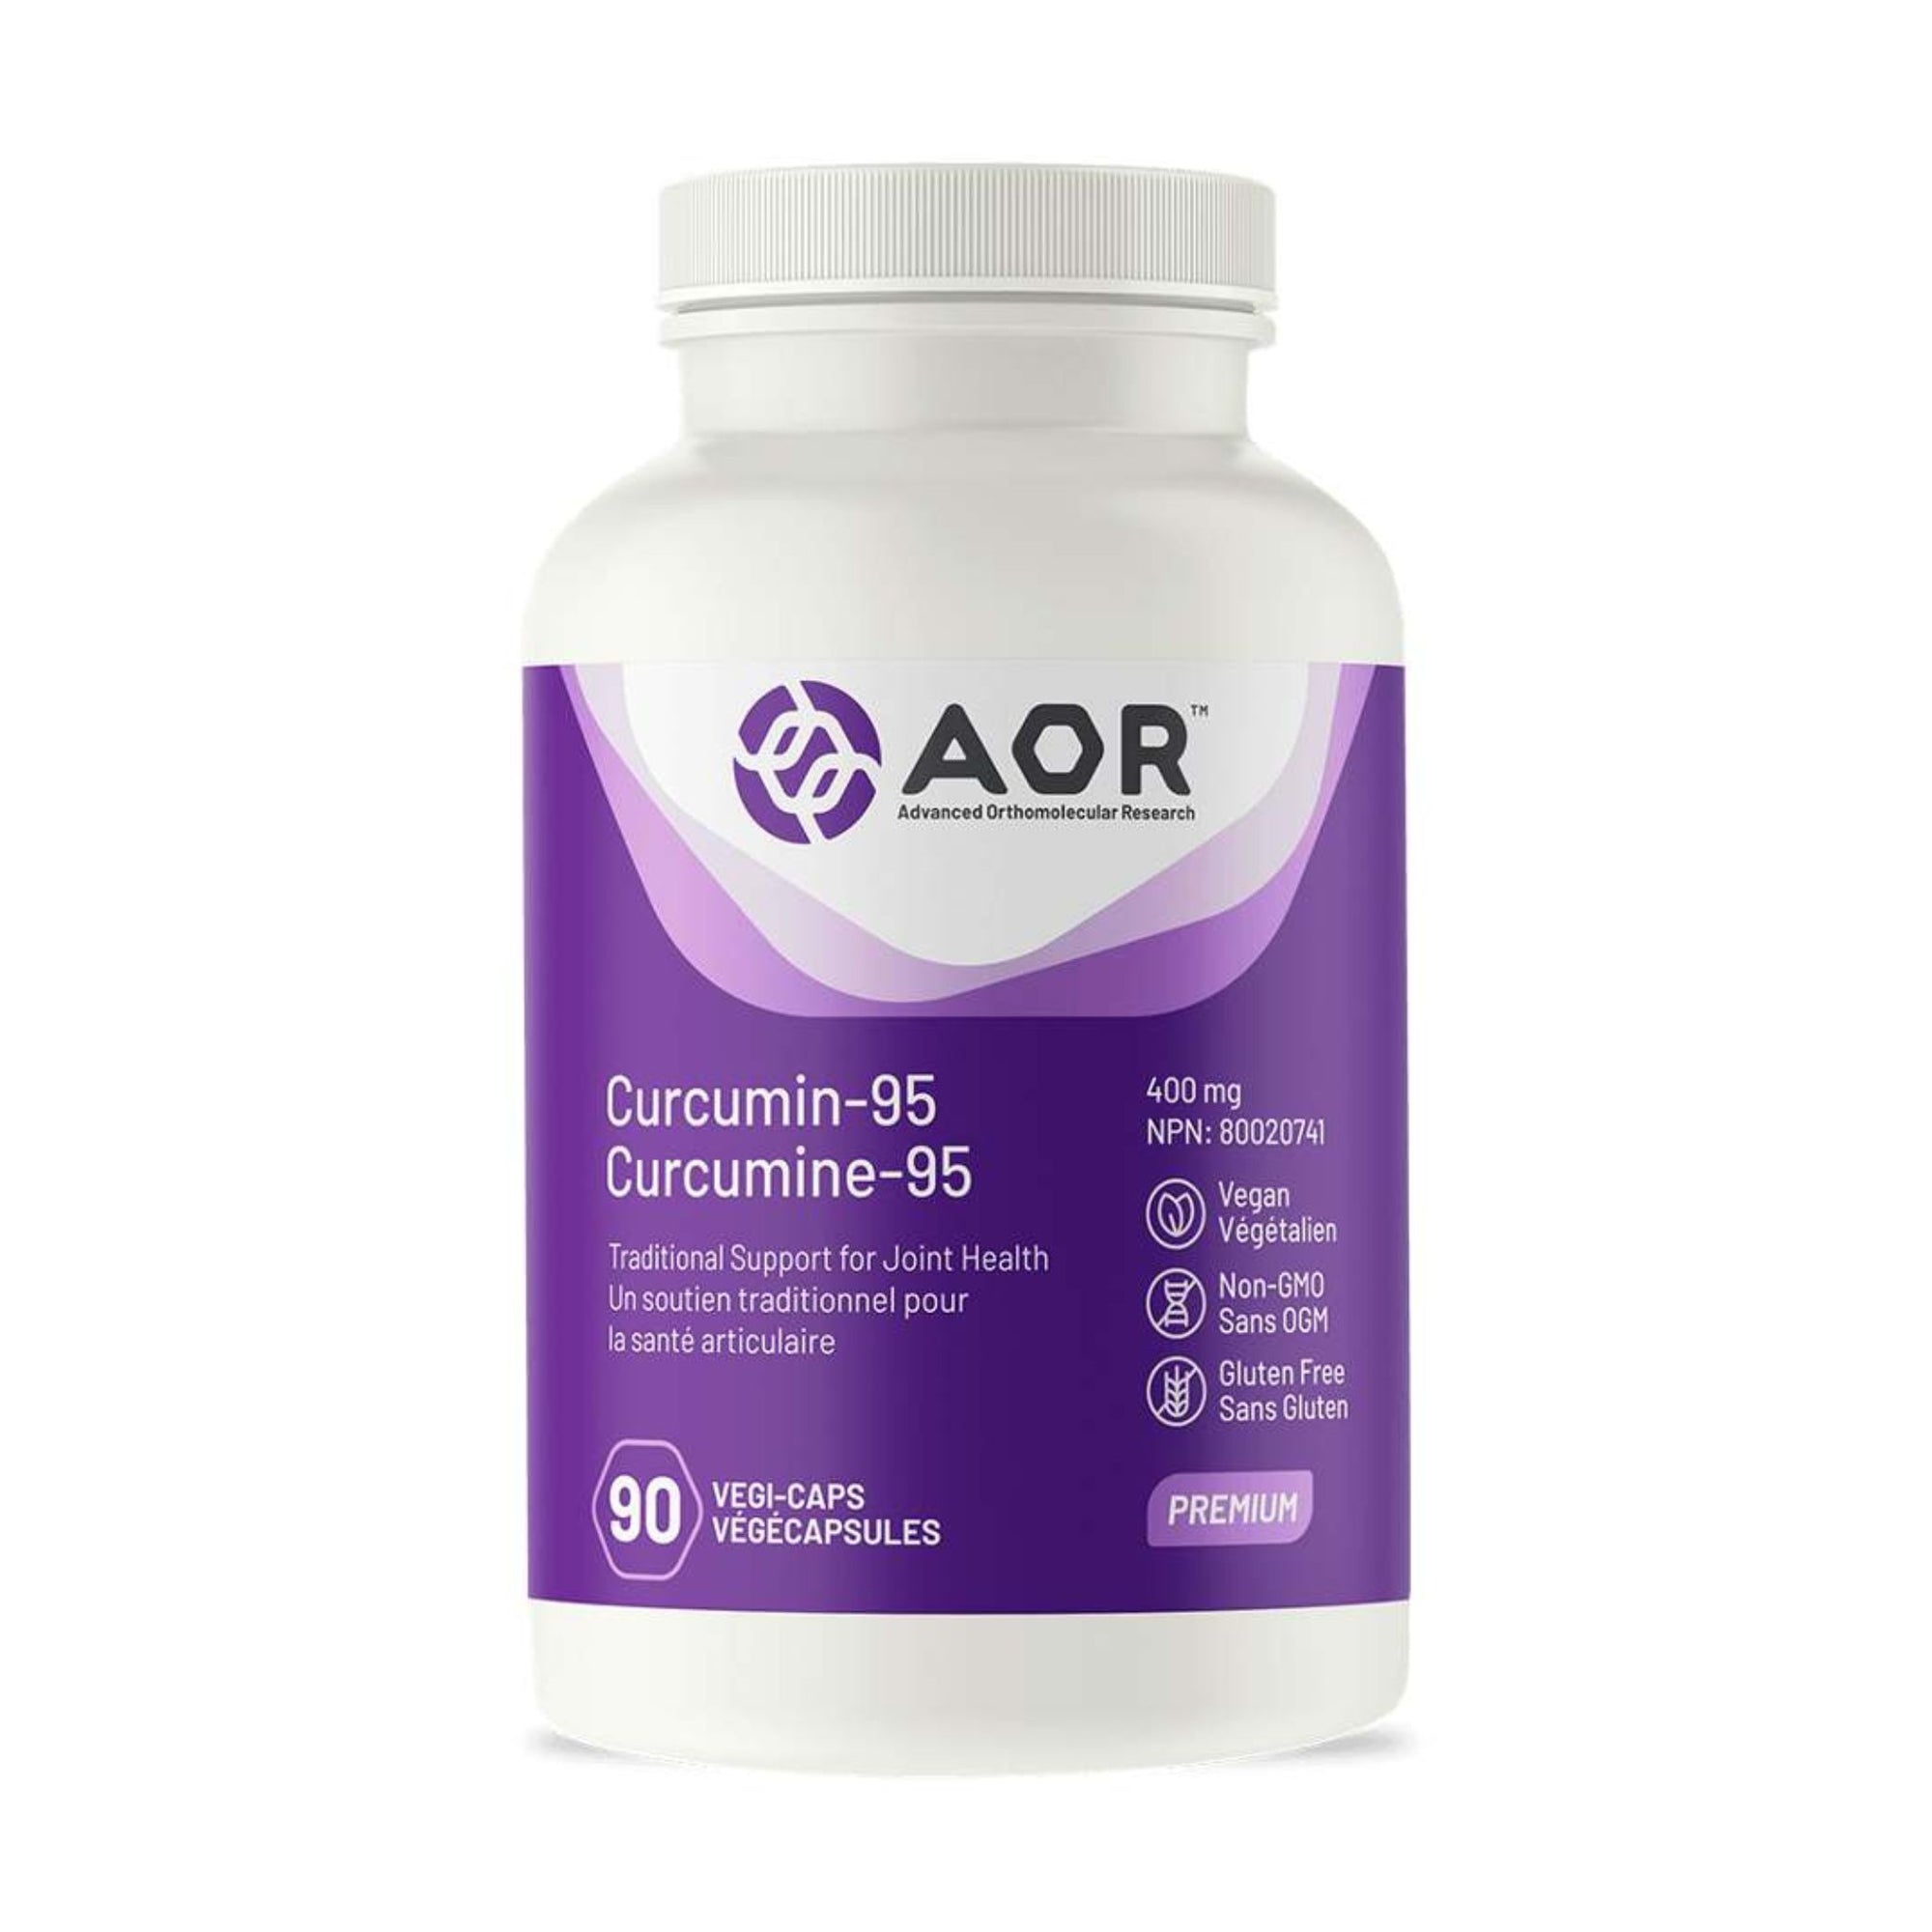 AOR Curcumin-95, 400mg 90 Vegetable Capsules - a supplement traditionally used as support for joint health. 